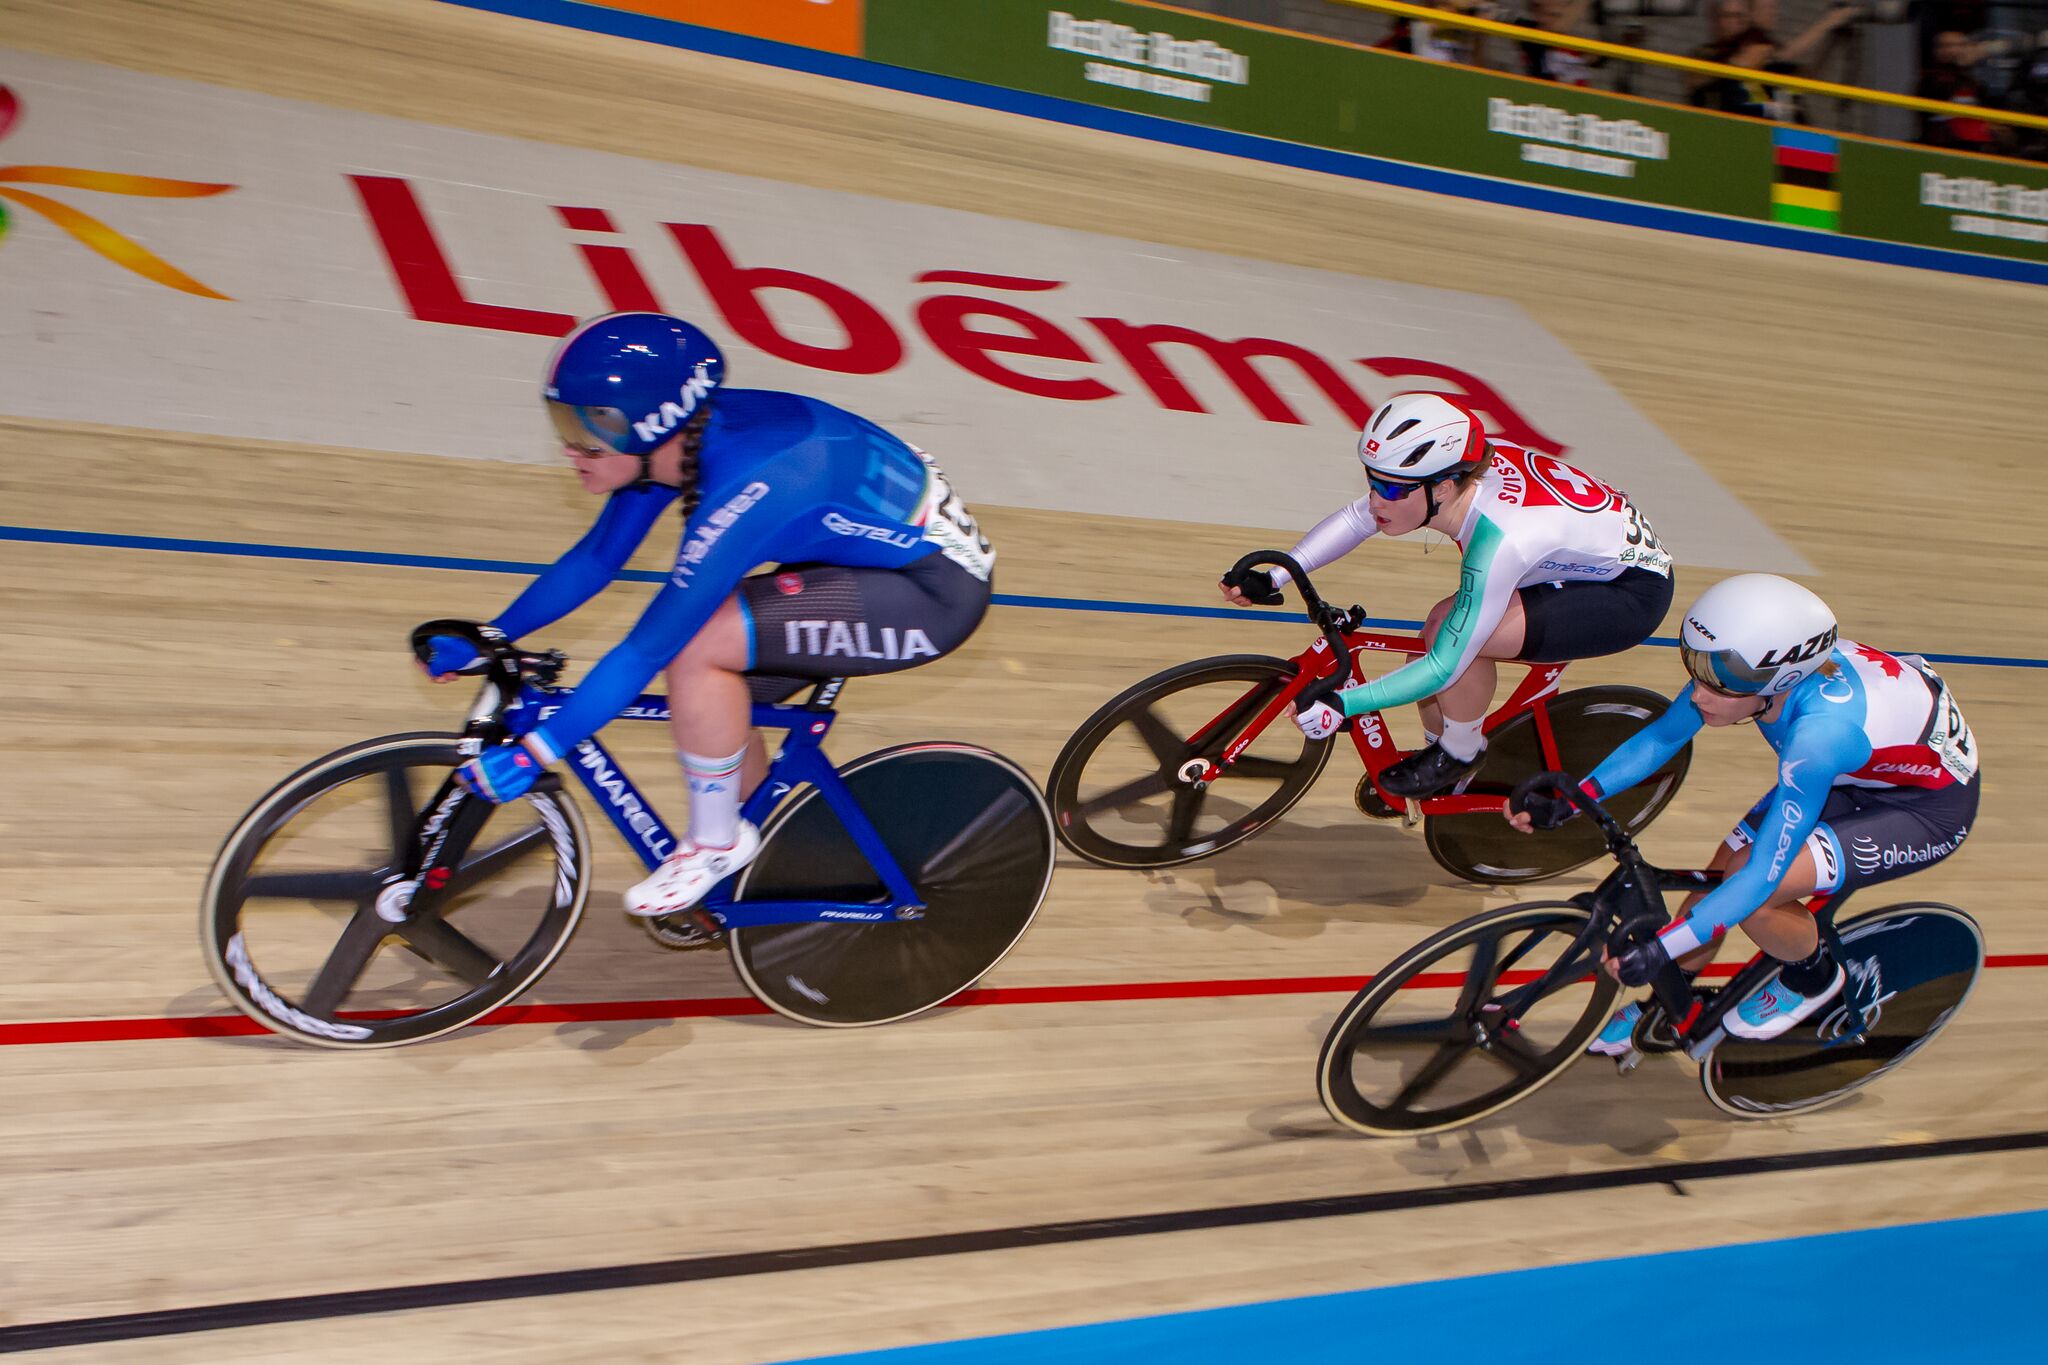 apd10072-switserland-track-world-champs-apeldoorn-2018-day-1-wscratchrace-28-februari-2018-preview